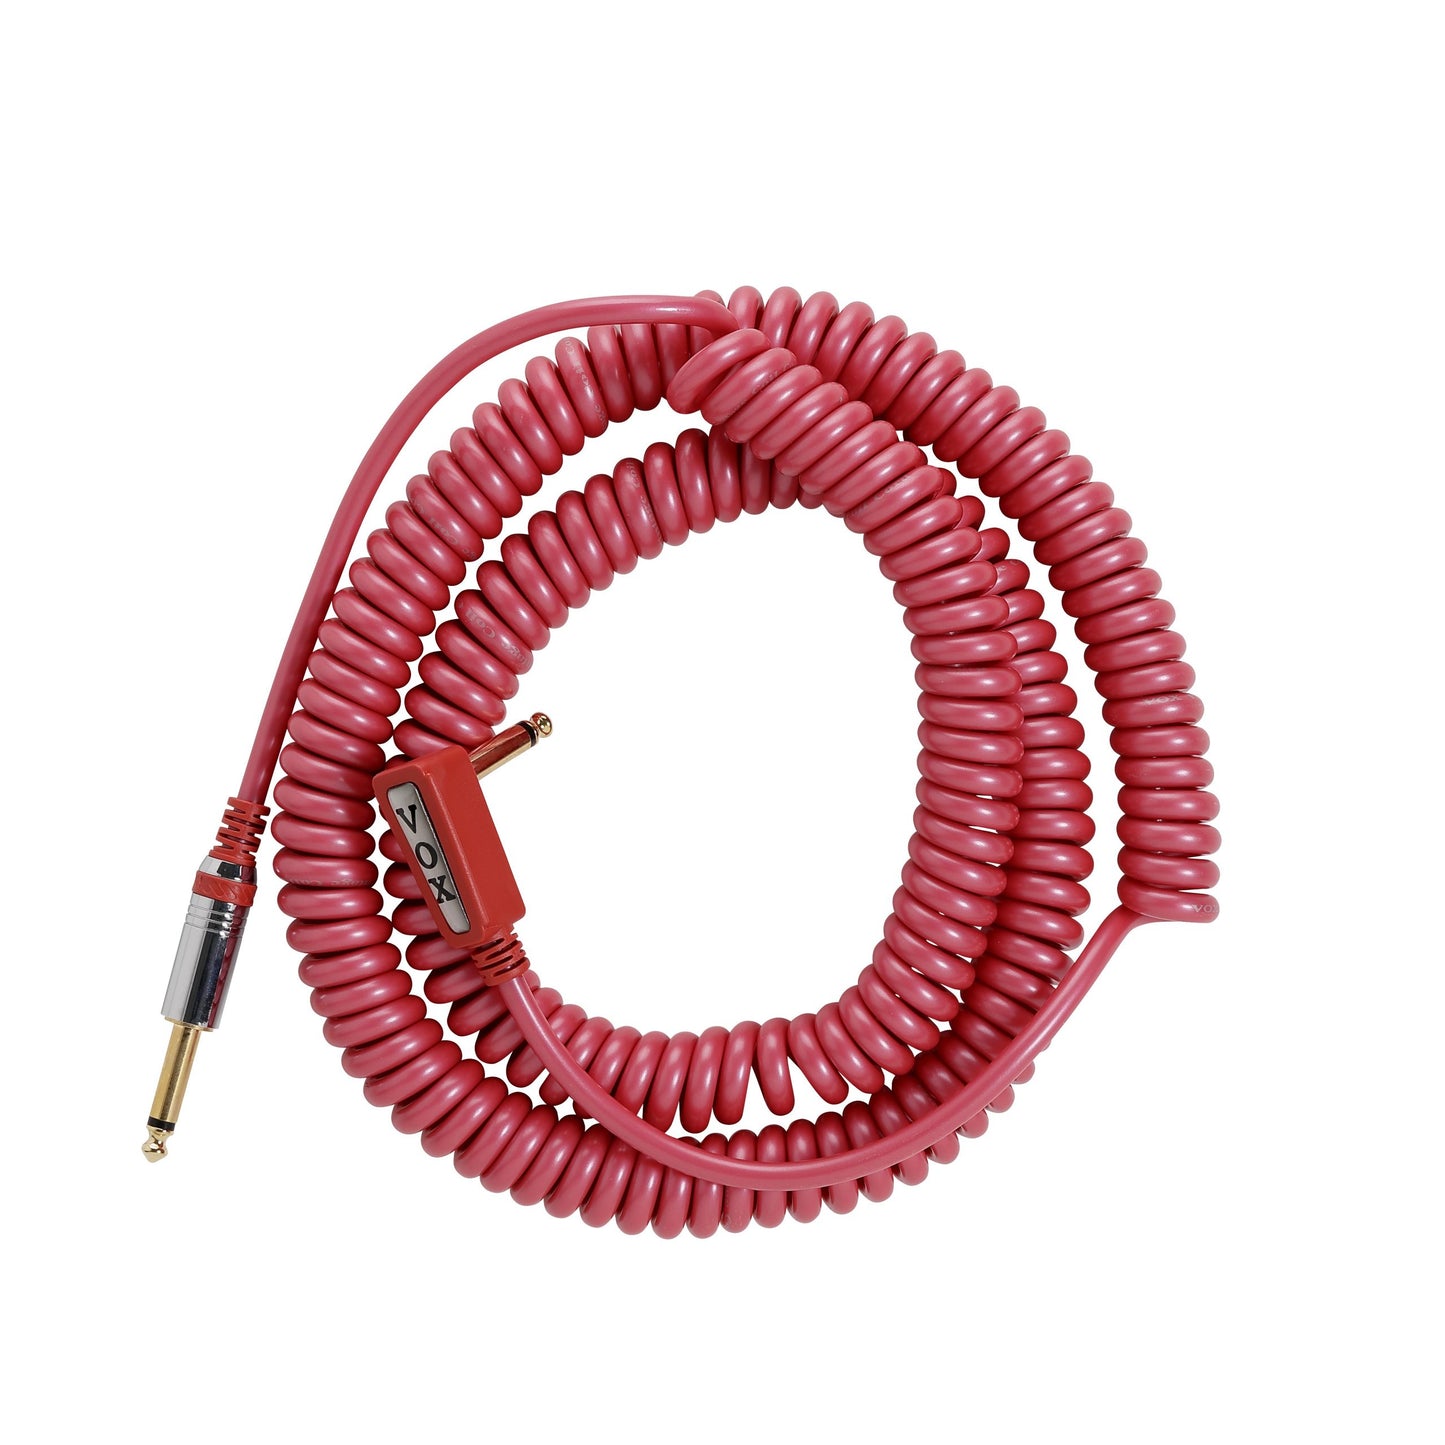 Vox Vintage Coil Cable - 29,5ft - (9 metros) Red